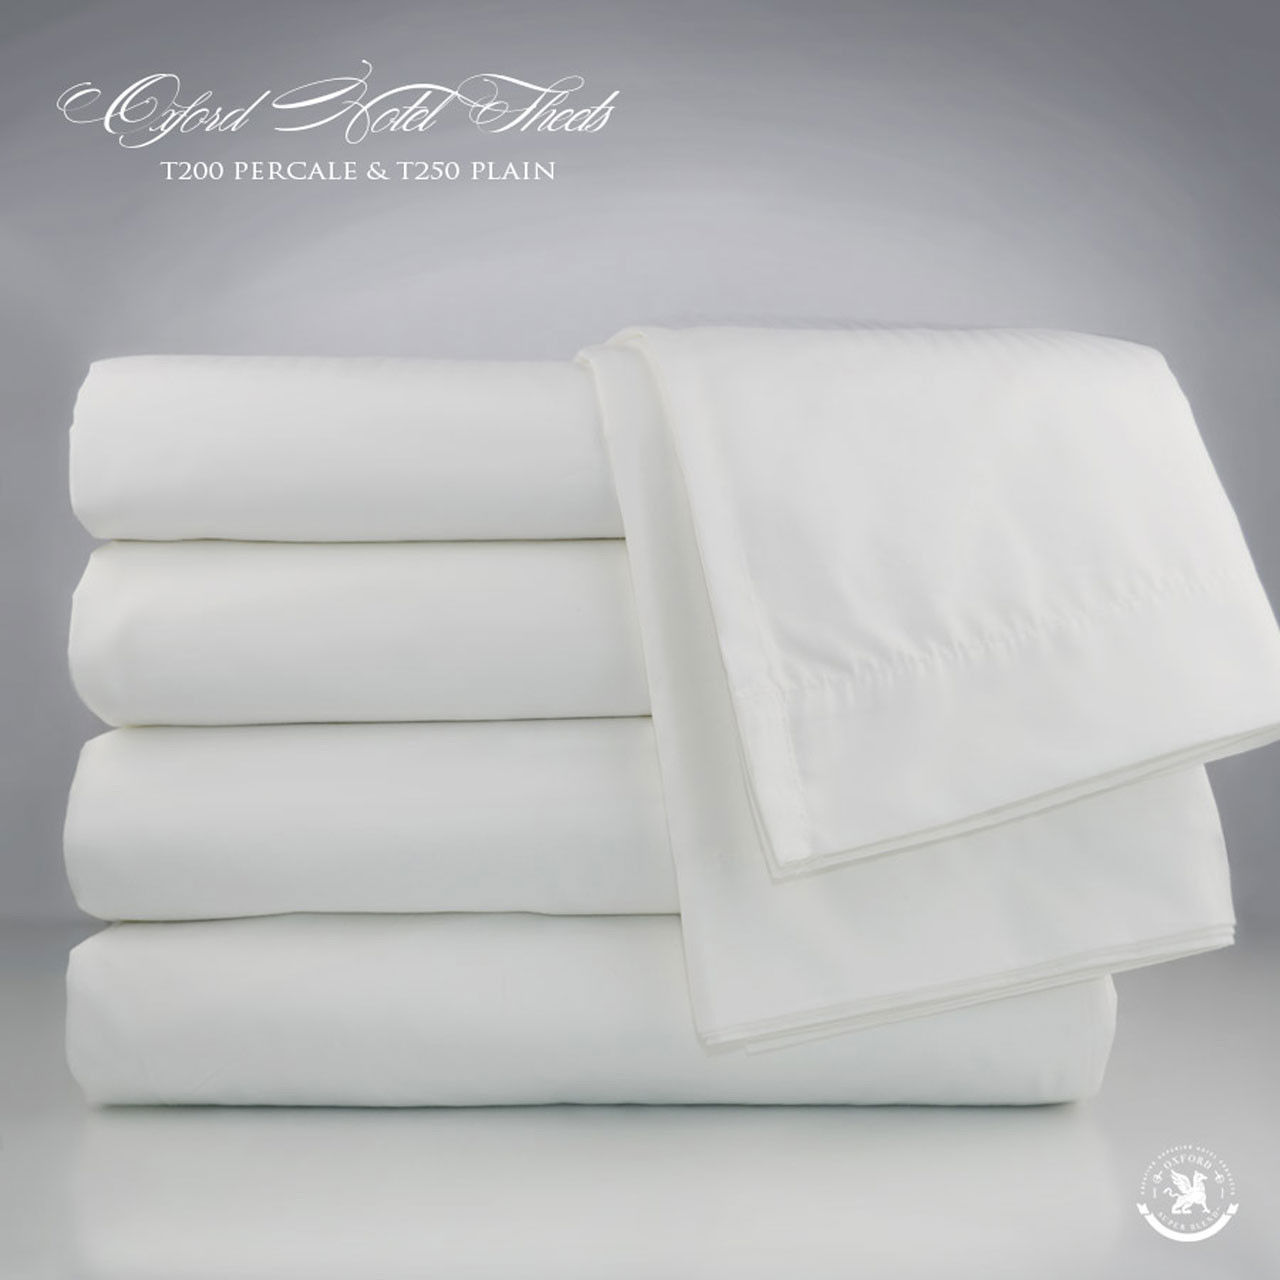 What is the deepest fitted sheet you can get?